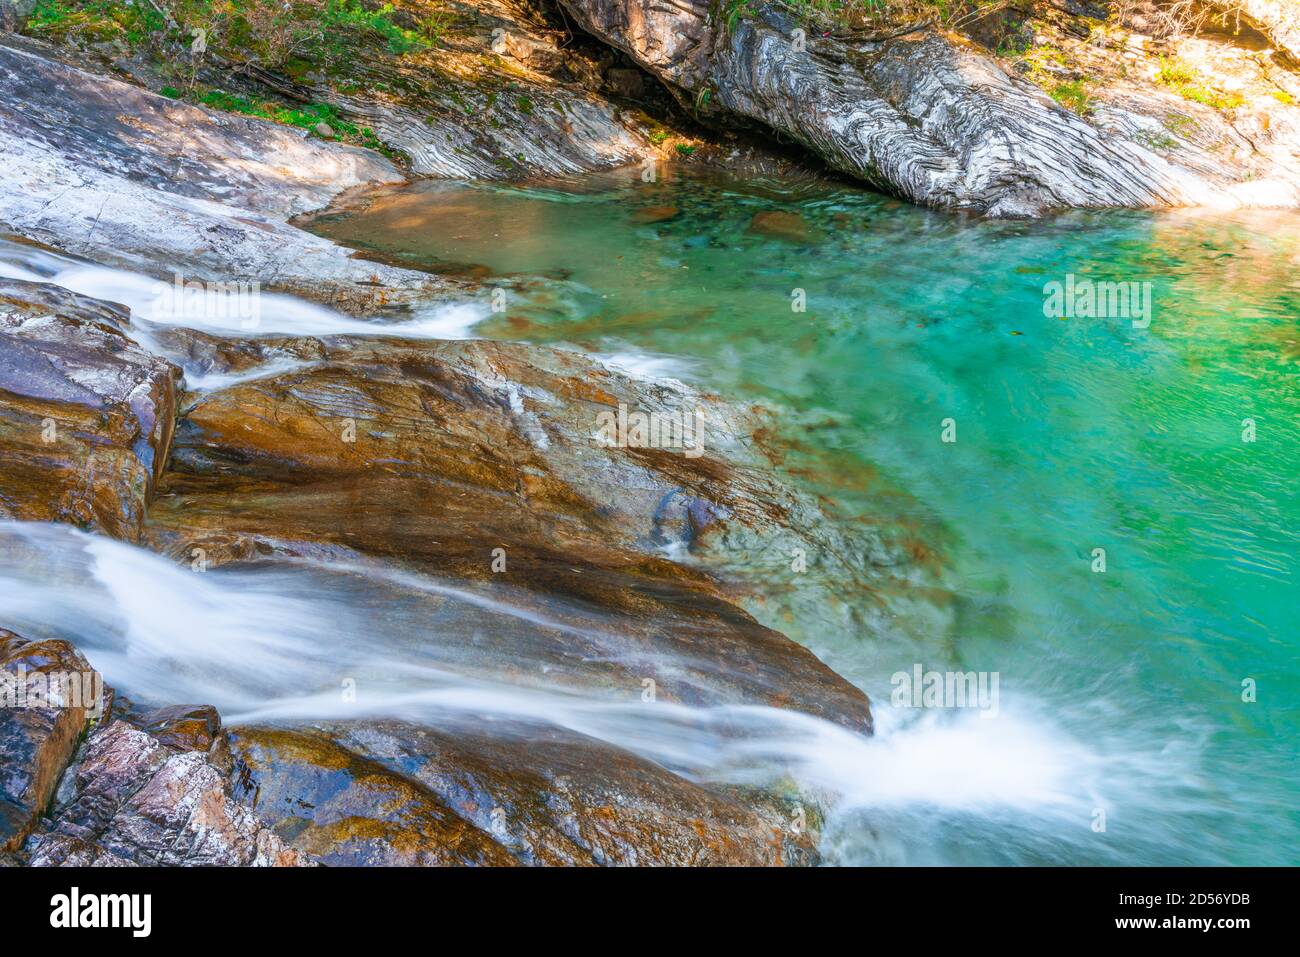 Emerald valley, a peaceful mountain valley with turquoise water creek and small waterfalls in Yellow mountain, Anhui province, China. Stock Photo